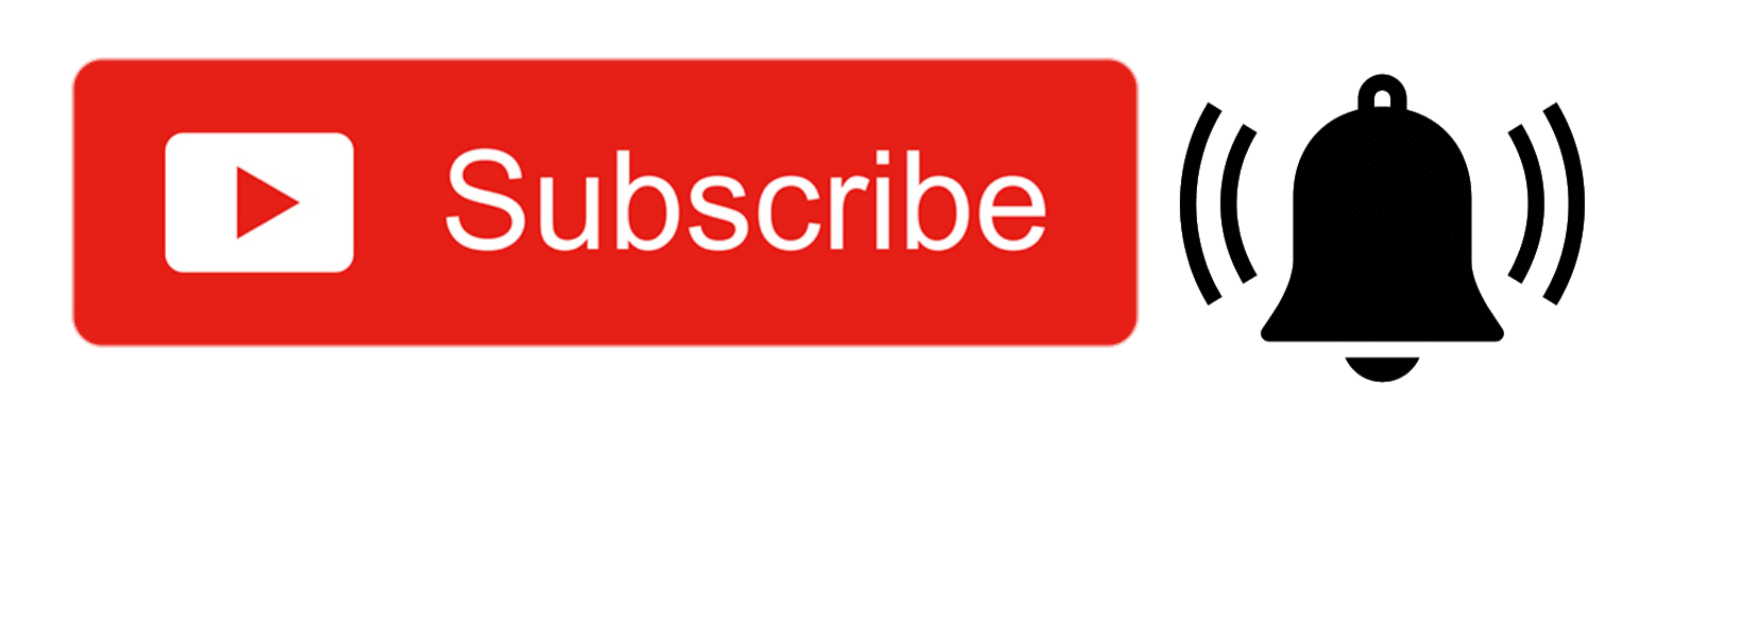 Subscribe shares. Кнопка подписаться. Кнопка Подпишись. Кнопка подписаться и лайк. Subscribe me.